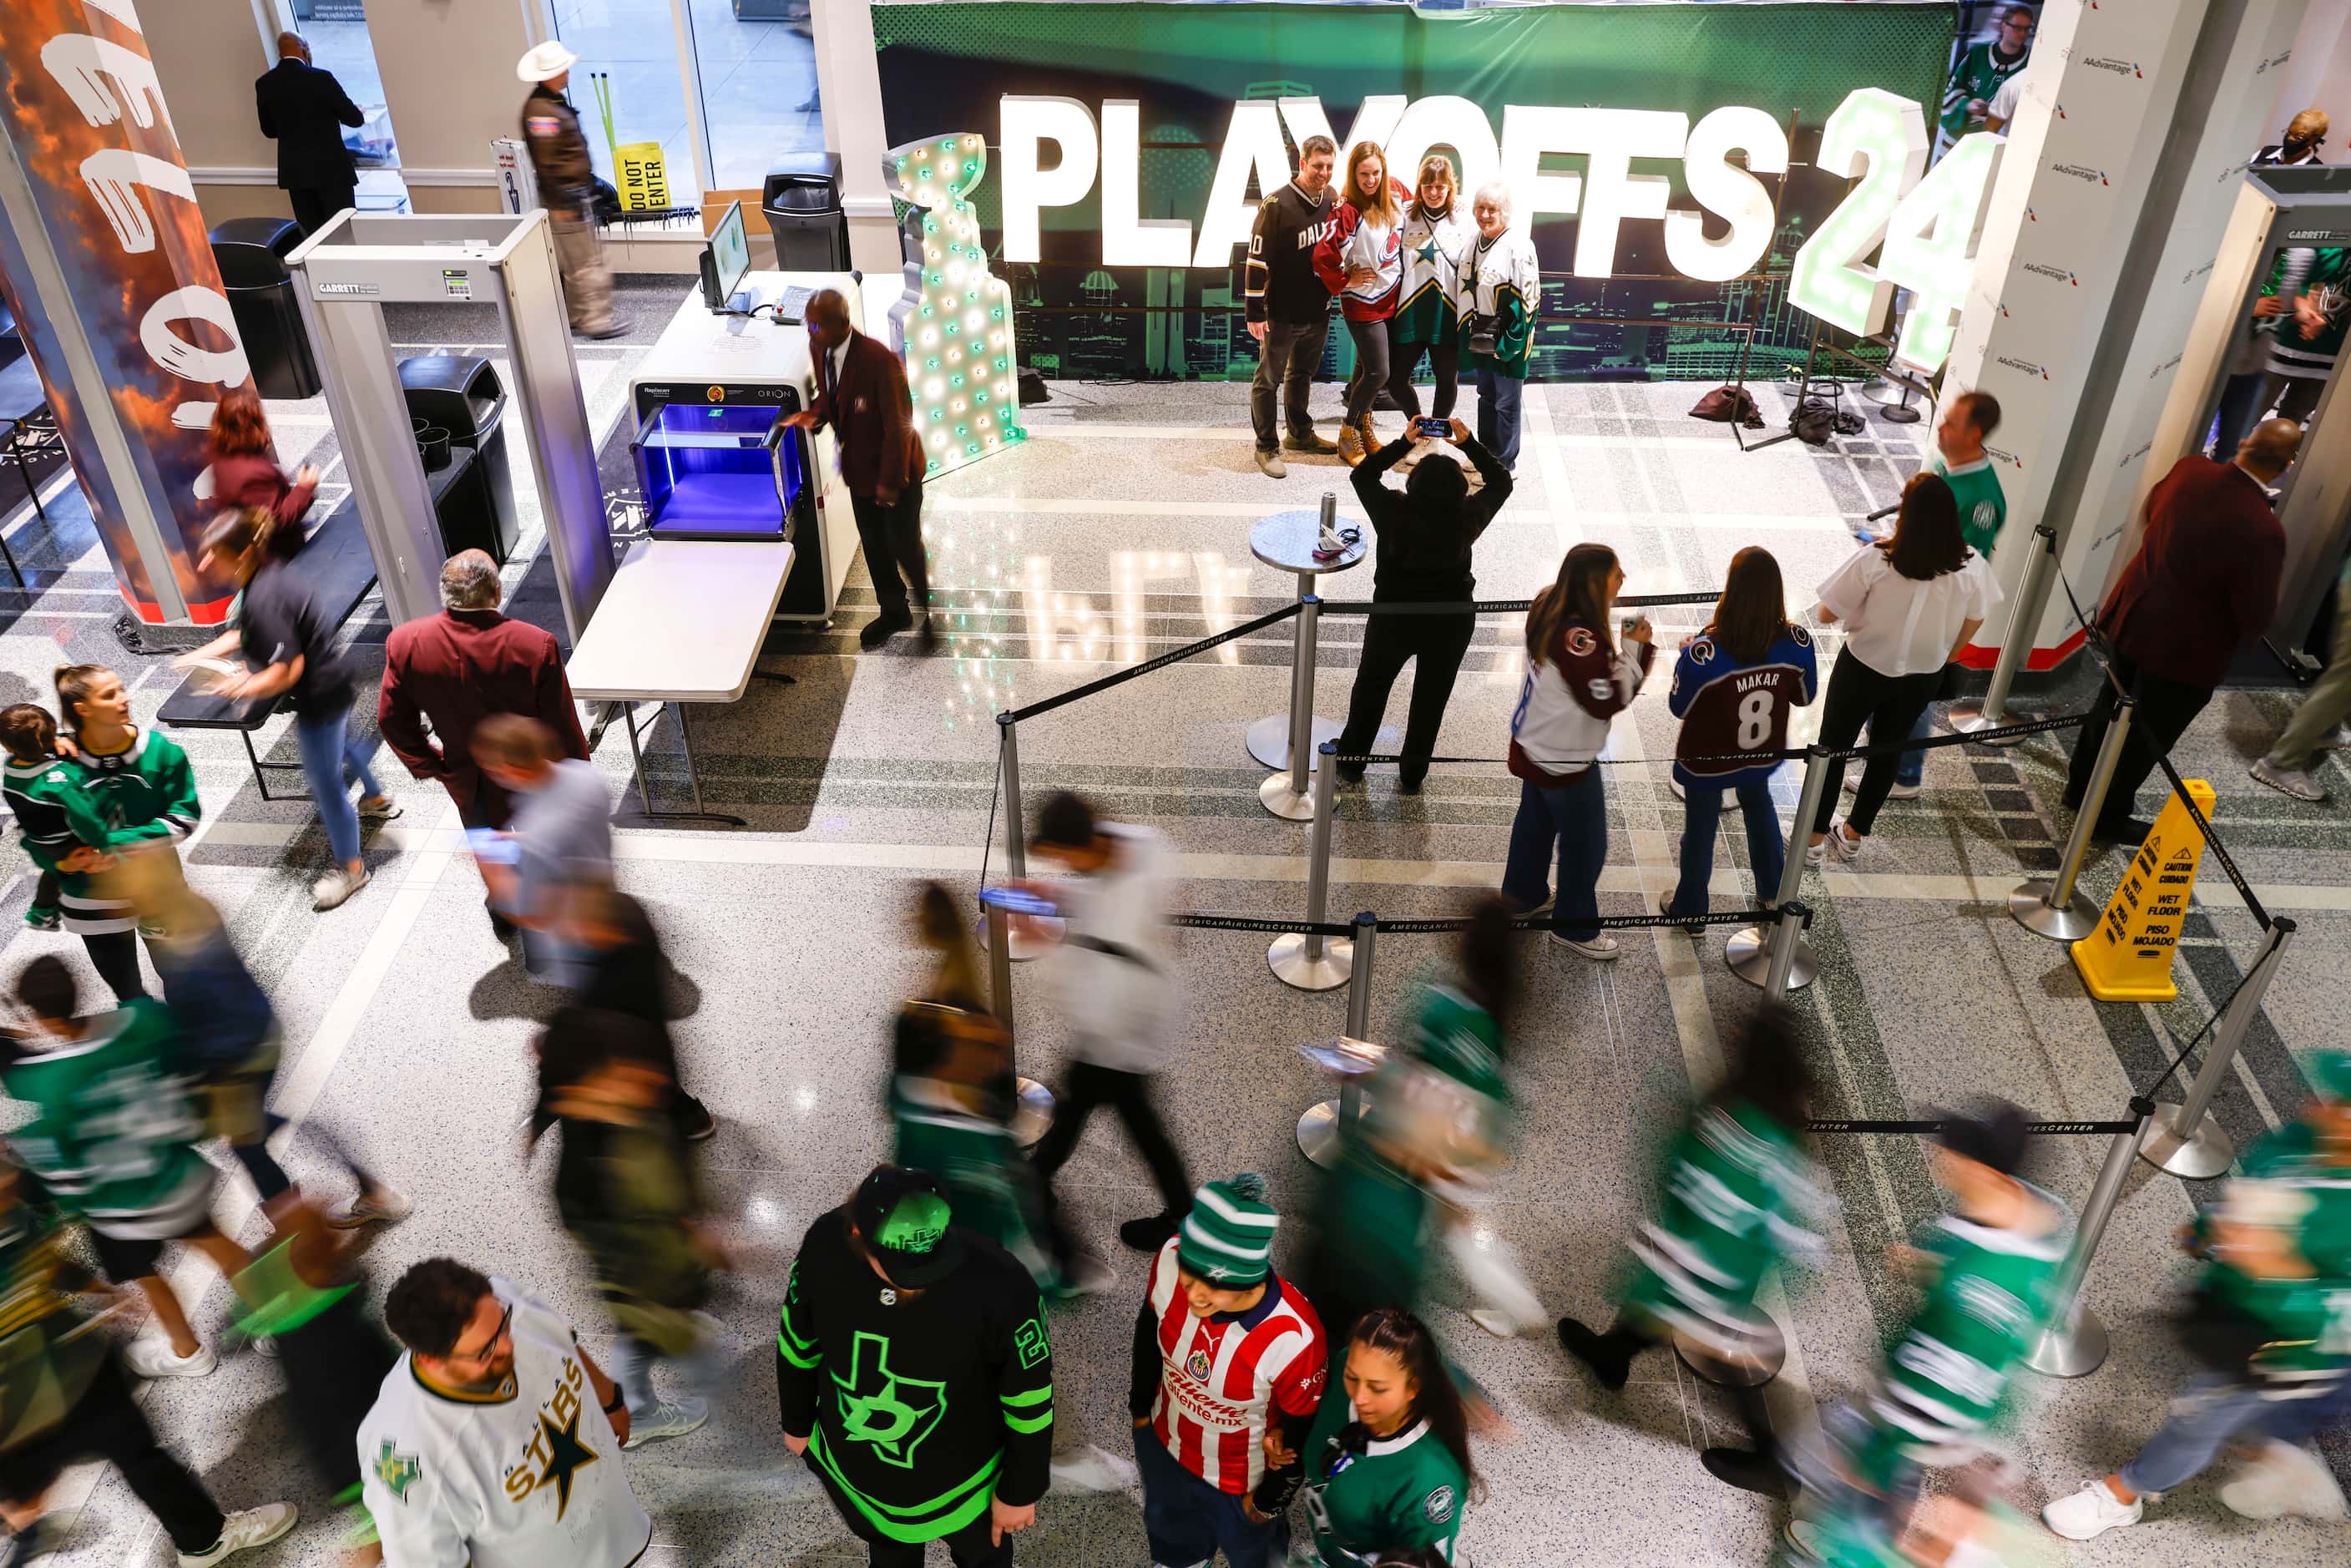 Fans pose for photos in front of a sign as others cruises through the concourse ahead of...